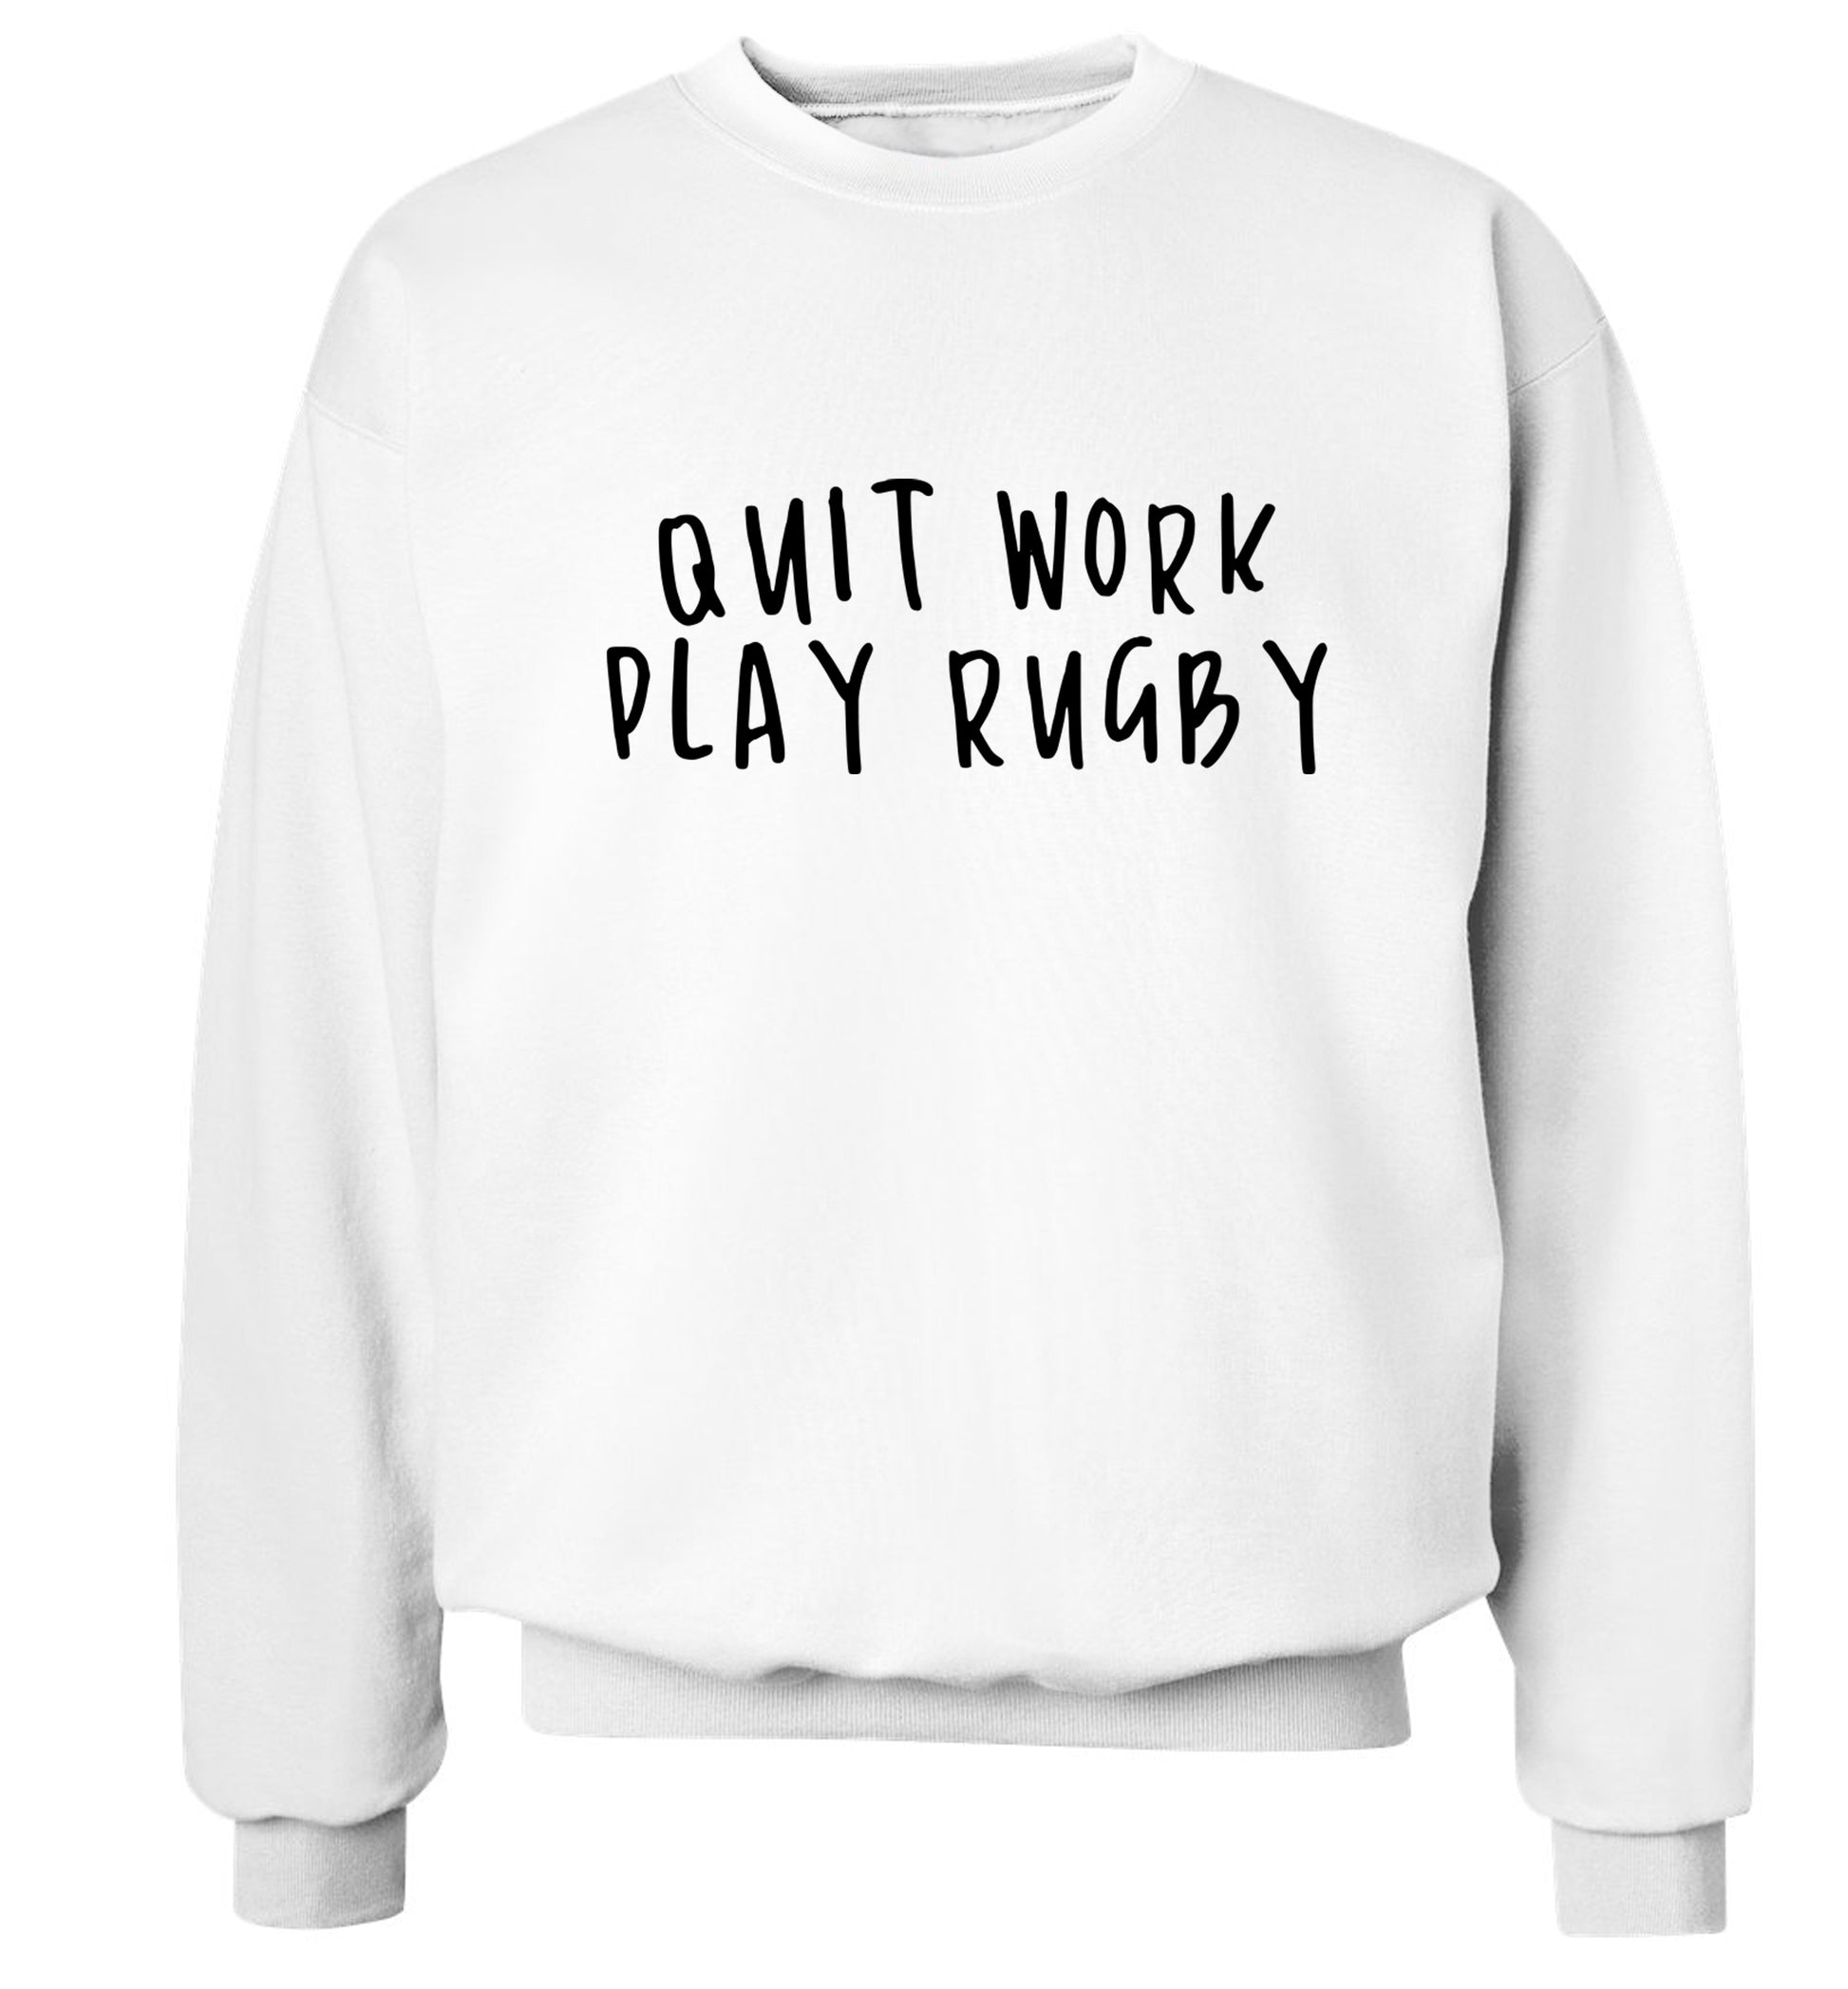 Quit work play rugby Adult's unisex white Sweater 2XL